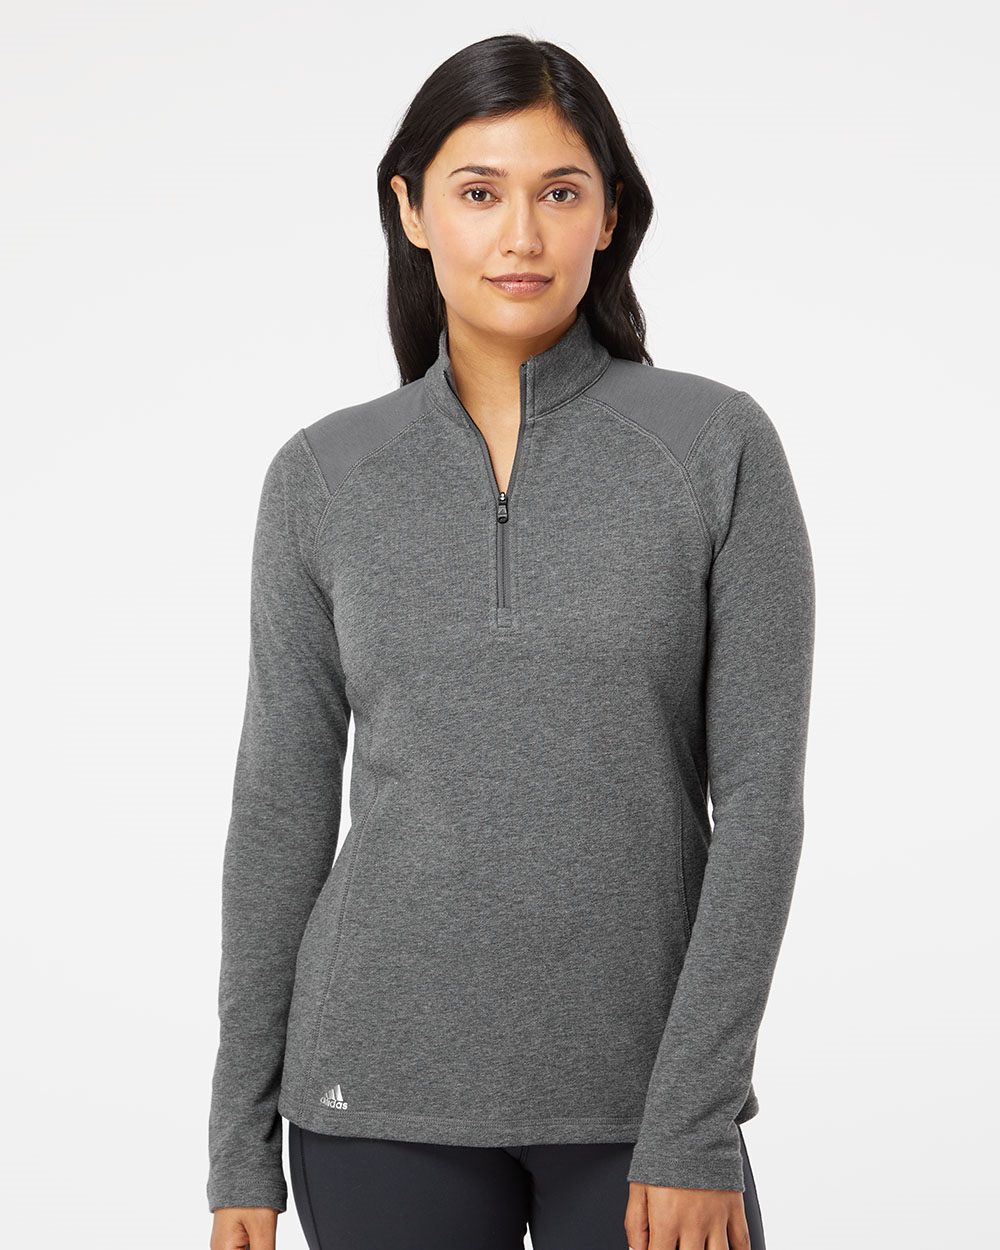 Adidas A464 - Women's Heathered Quarter-Zip Pullover with Colorblocked  Shoulders